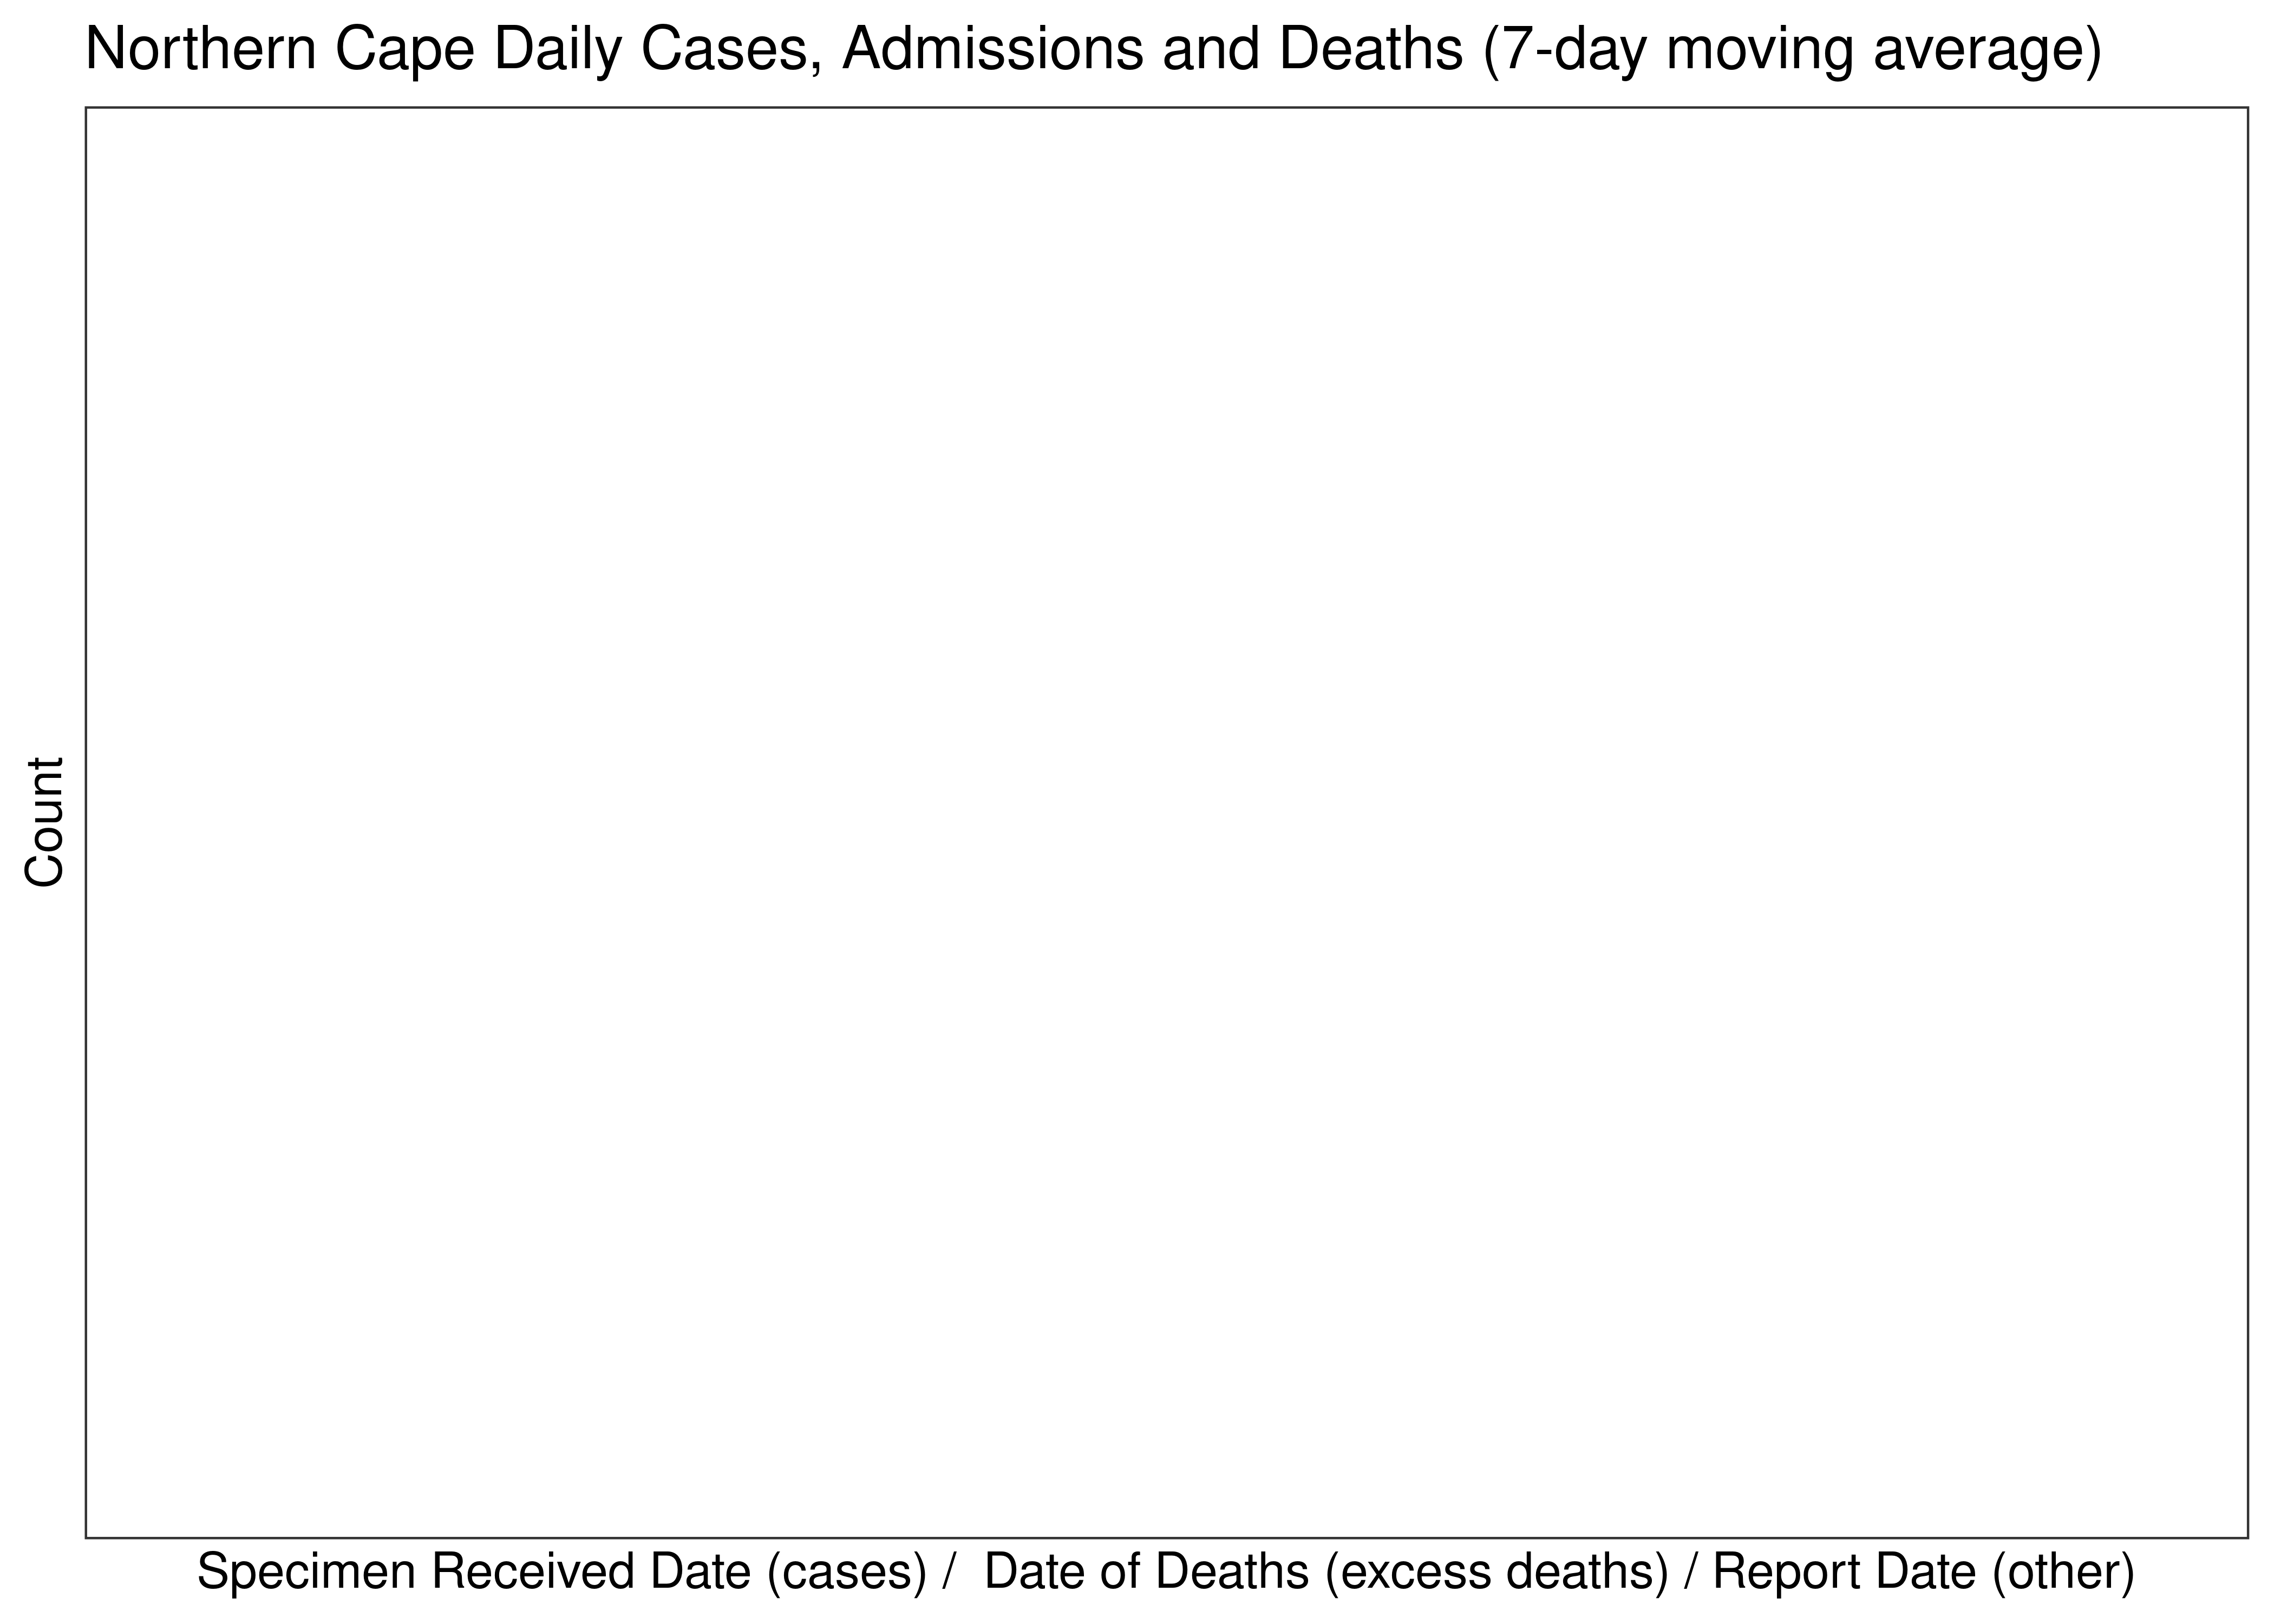 Northern Cape Daily Cases, Admissions and Deaths for Last 30-days (7-day moving average)